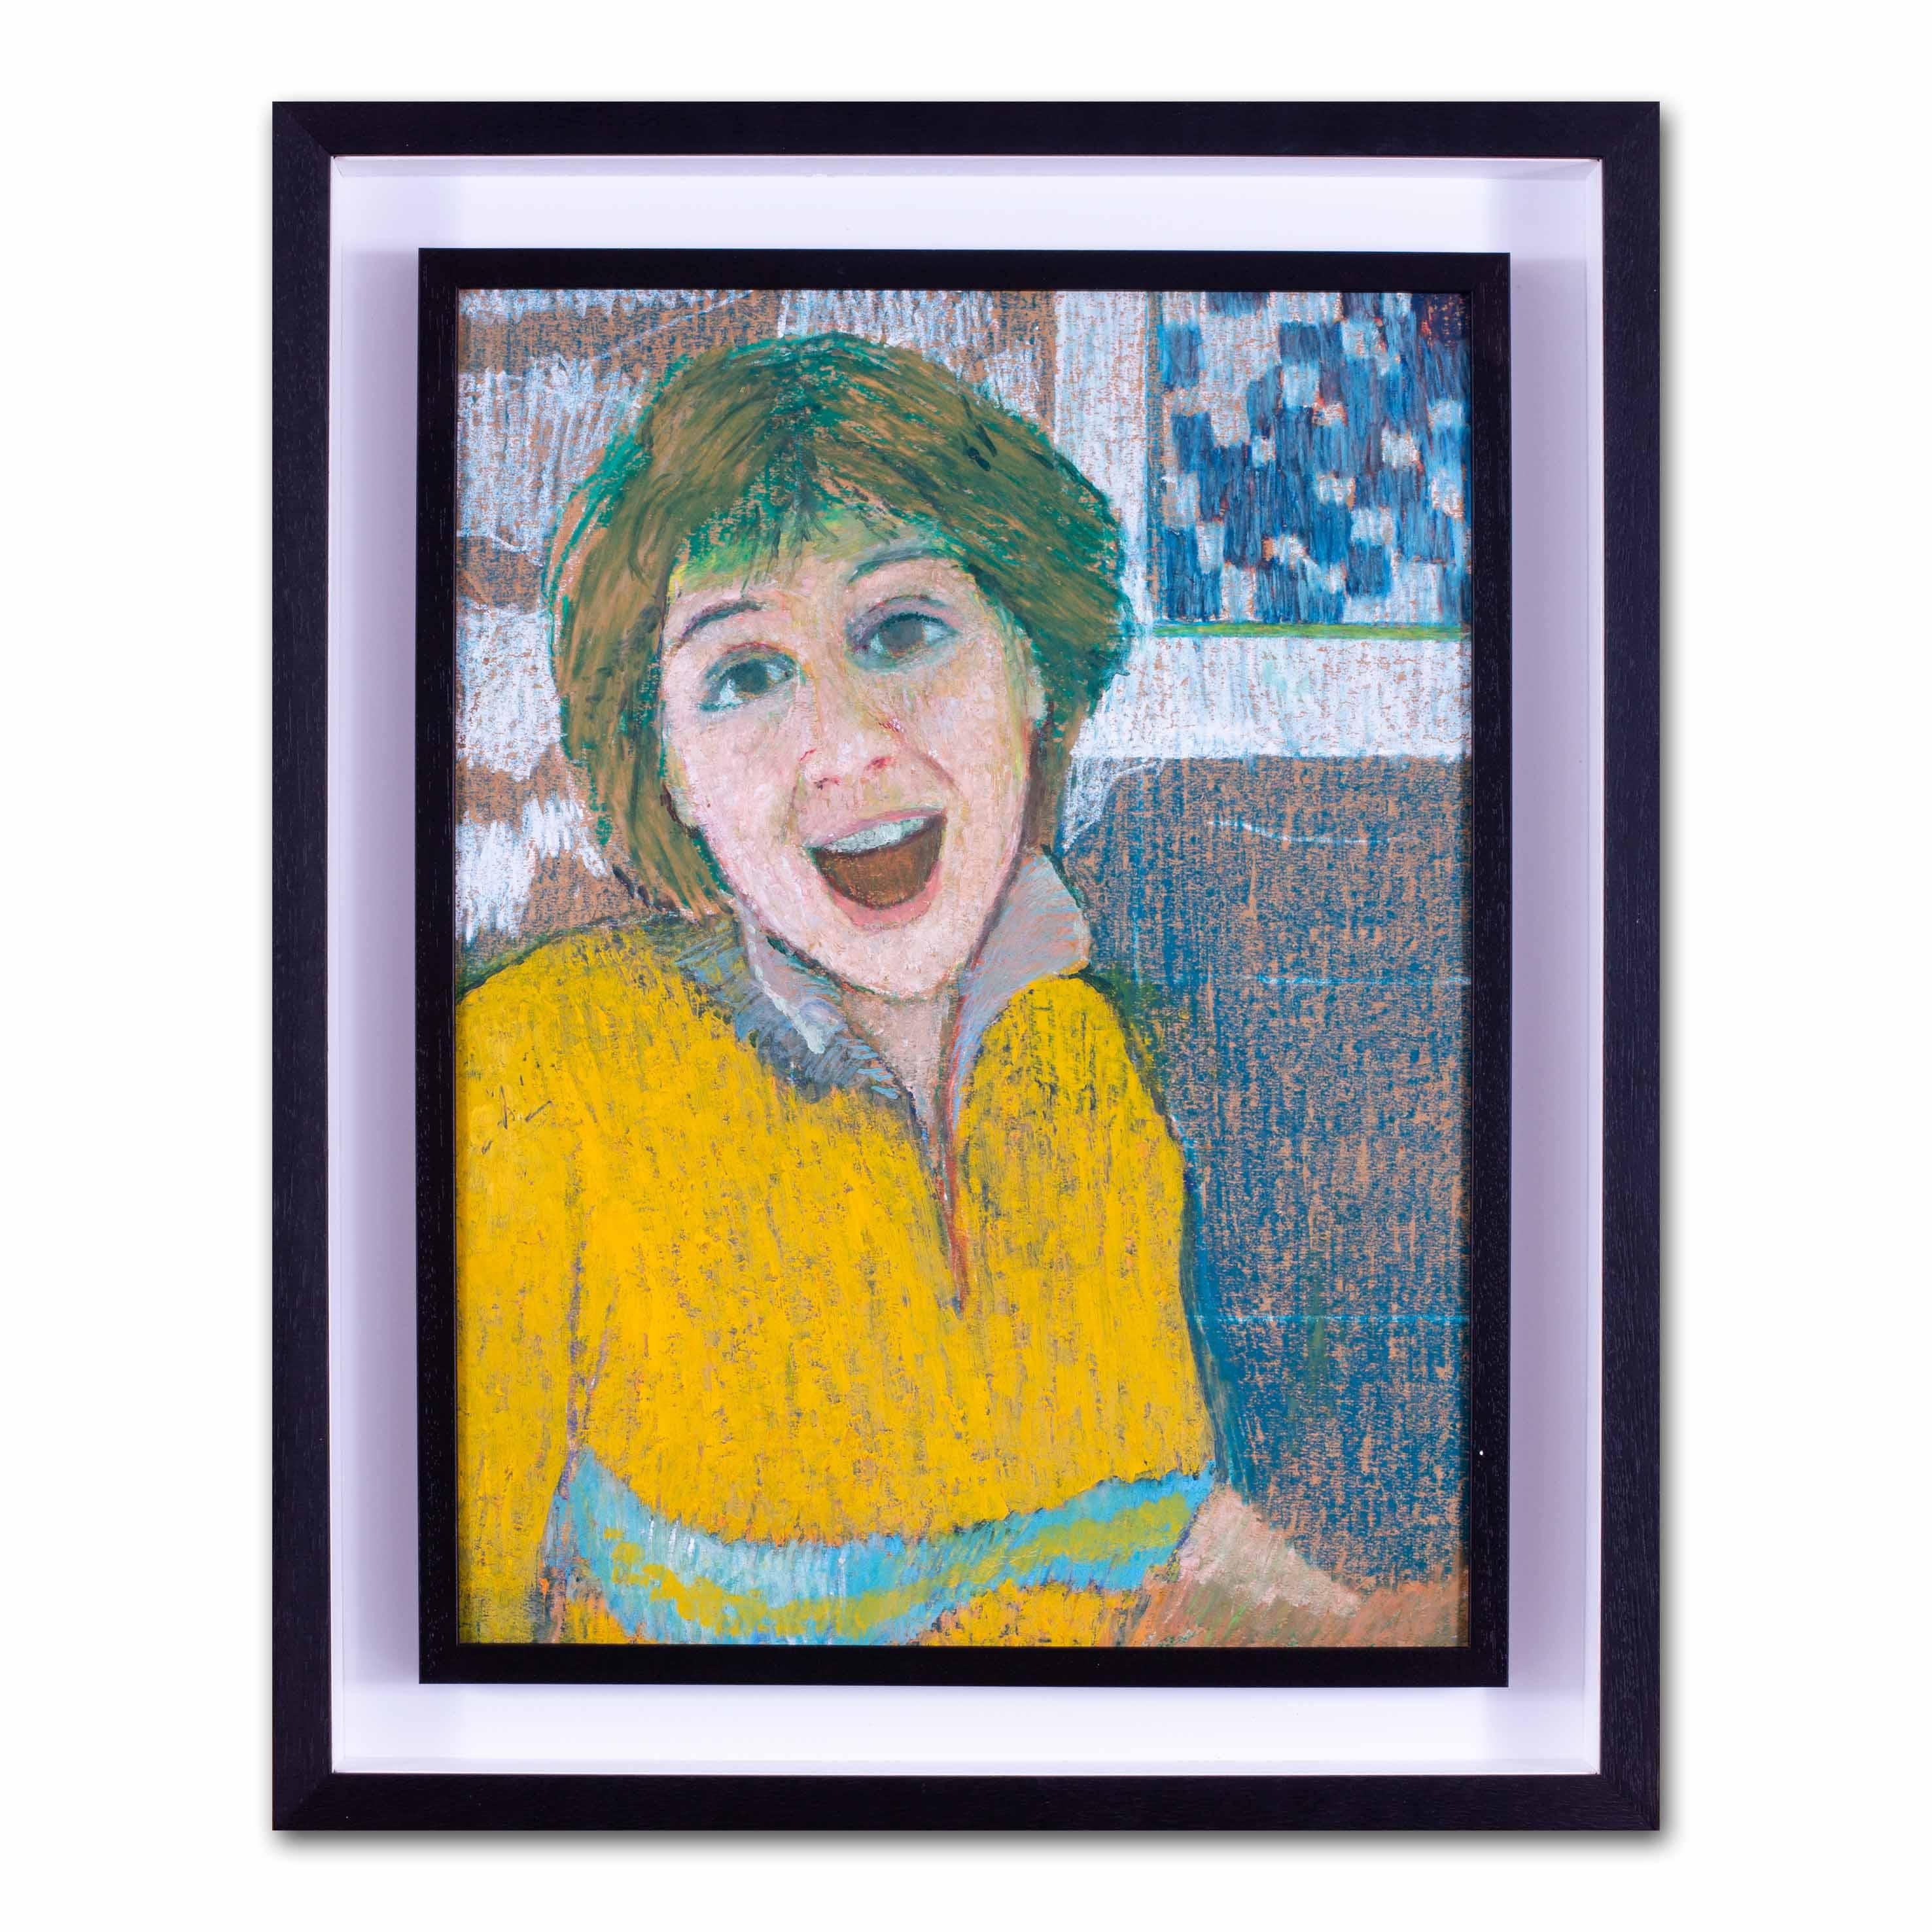 A bright and engaging portrait of the famed comedian Victoria Wood (1953 - 2016). She wears a vibrant yellow jersey with a vivid blue stripe running across it. In the background are various prints and pictures in reds and blues, creating a textured